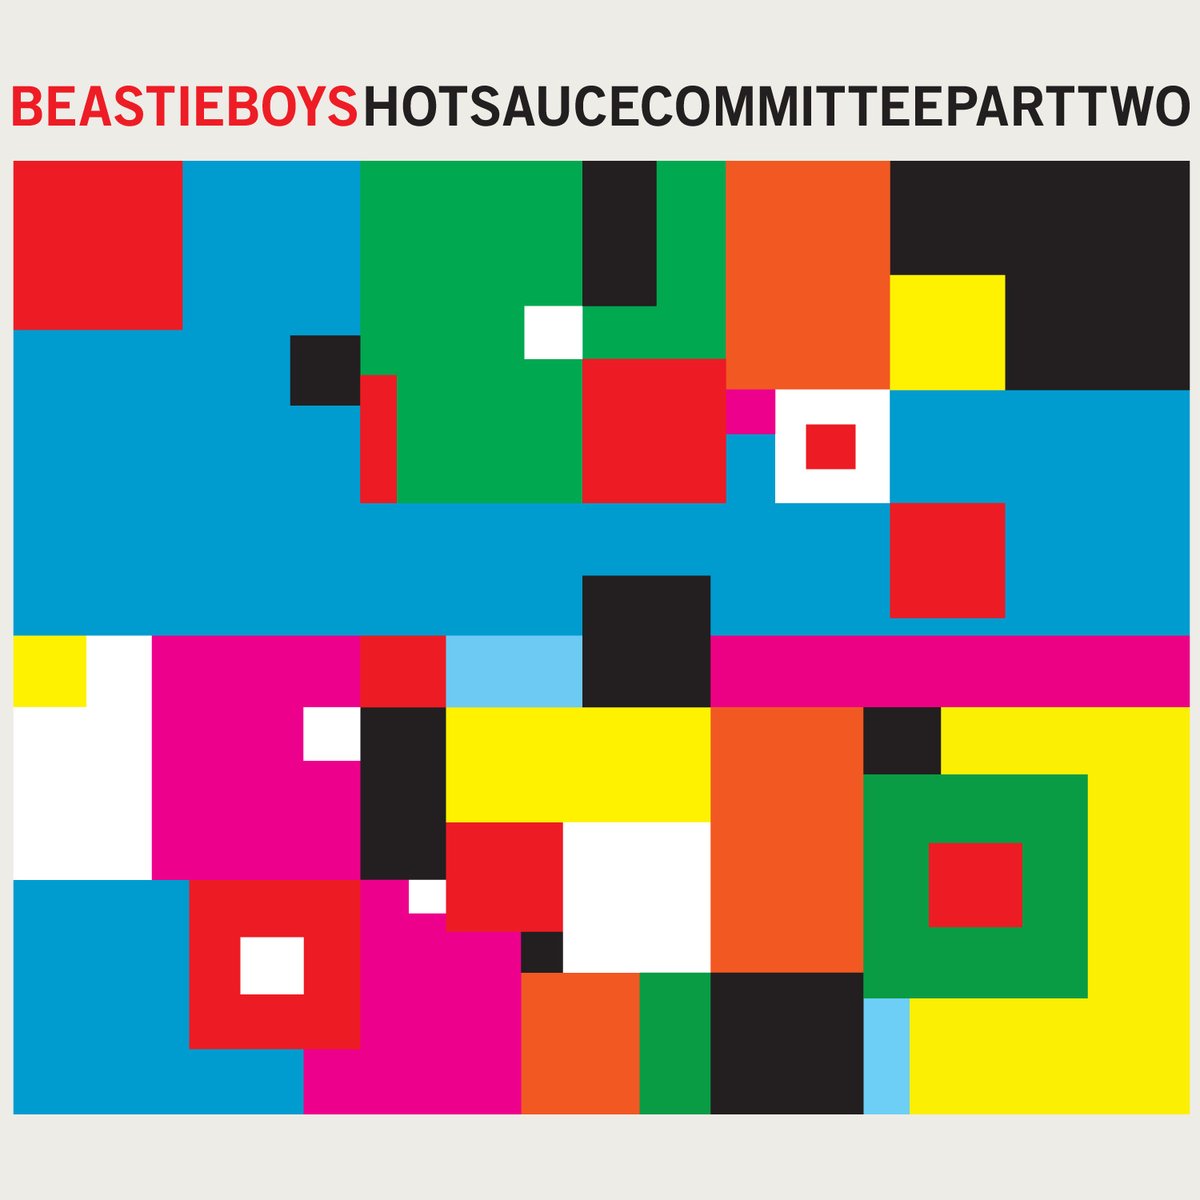 Hot Sauce Committee Part Two is the eighth and final album by the @beastieboys. It was released on May 3, 2011.

What do you appreciate about this album?

#GoListenToThisRecord